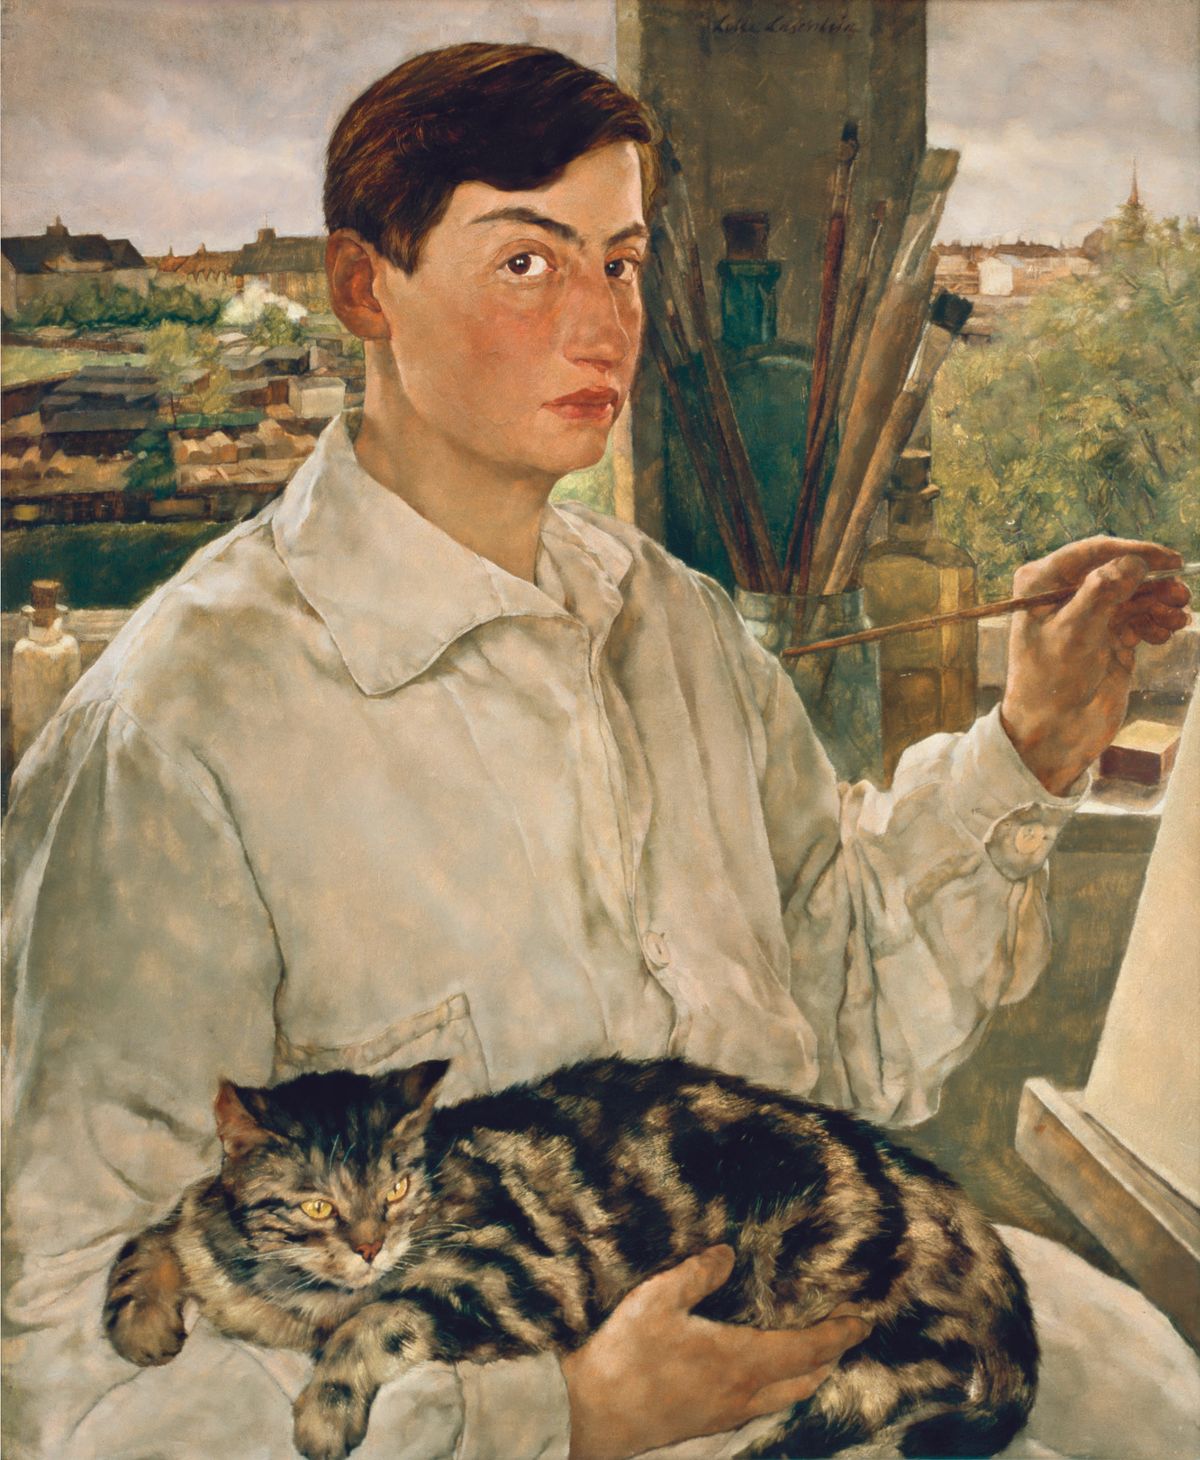 Lotte Laserstein’s Self-Portrait with a Cat (1928), one of around 85 paintings going on show © Lotte Laserstein Archiv Krausse Berlin Modernamuseet